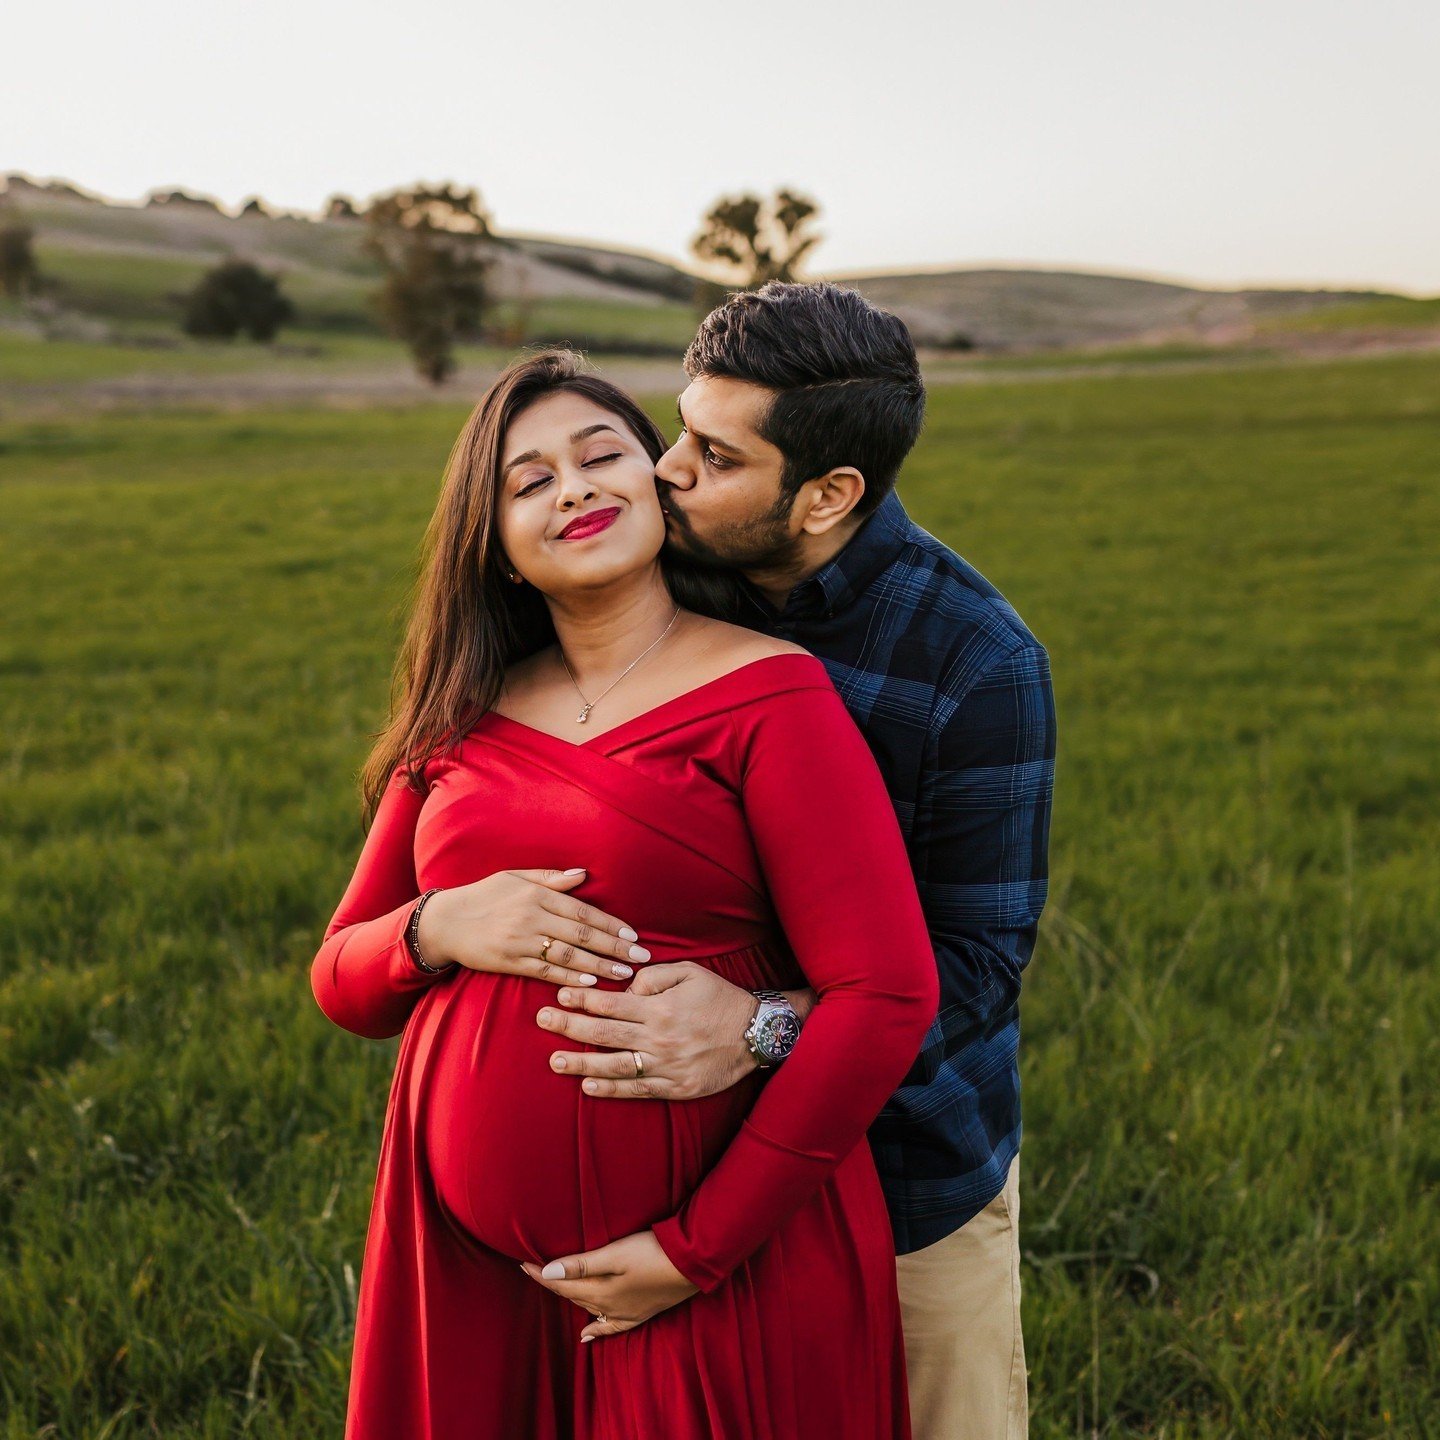 Let's capture this special moment against a backdrop of majestic peaks and lush landscapes, preserving the essence of your pregnancy journey, all the love, and all the feeling for your baby bump. ⁠
.⁠
.⁠
.⁠
.⁠
.⁠
.⁠
.⁠
#MaternityMagic #MotherhoodJour